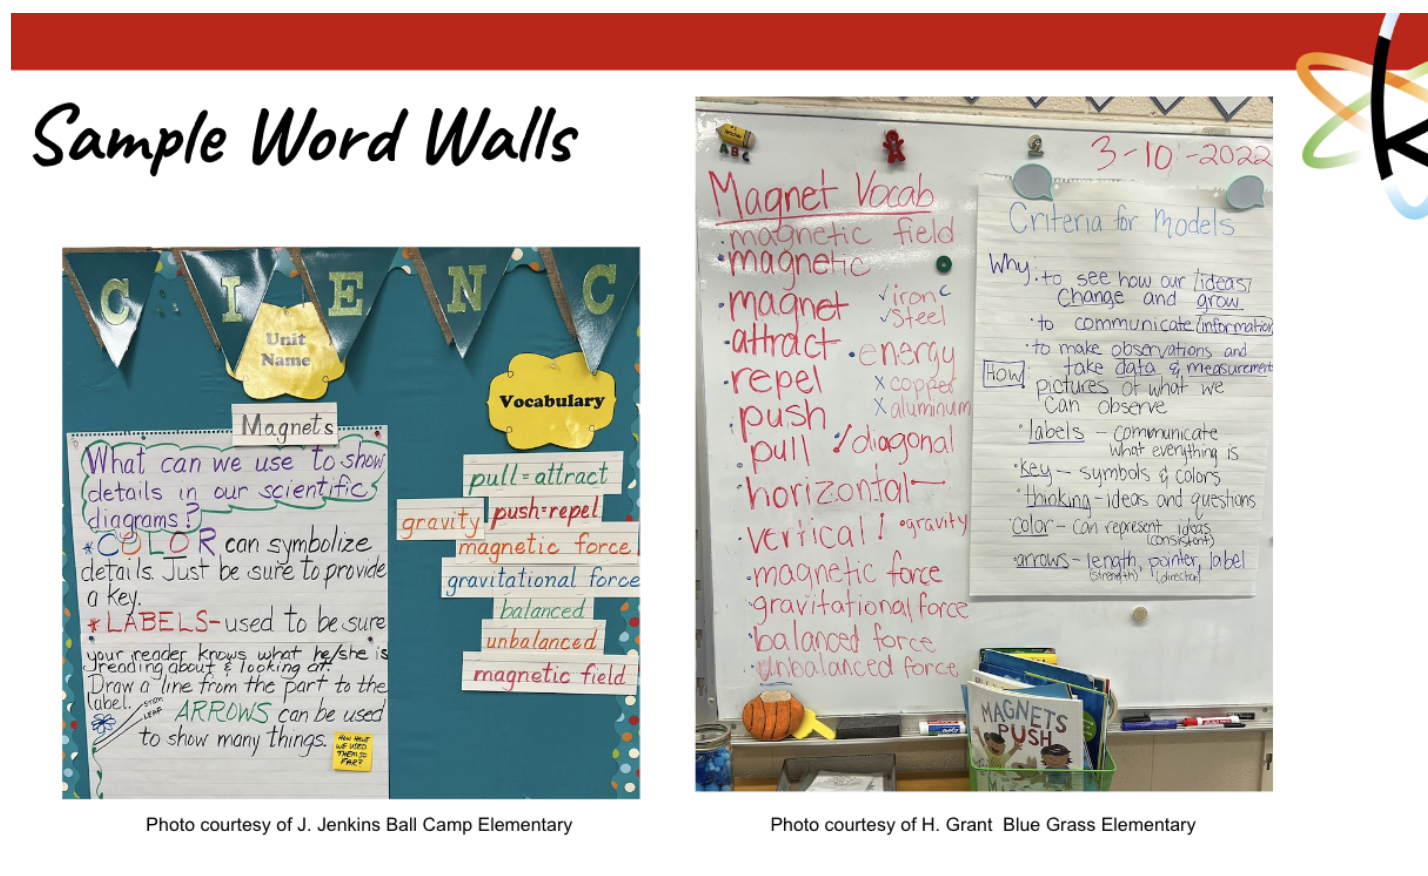 Sample word walls with the unit name, what an be used to show details in scientific diagrams such as arrows, color, and labels, and vocabulary such pull = attract, gravity, and magnetic force. The image on the right is of another word wall about magnets with criteria for models and a list of magnet vocab such as attract, repel, push, horizontal, balanced force, and energy (the two photos are courtesy of J. Jenkins Ball Camp Elementary and H. Grant Blue Grass Elementary). 